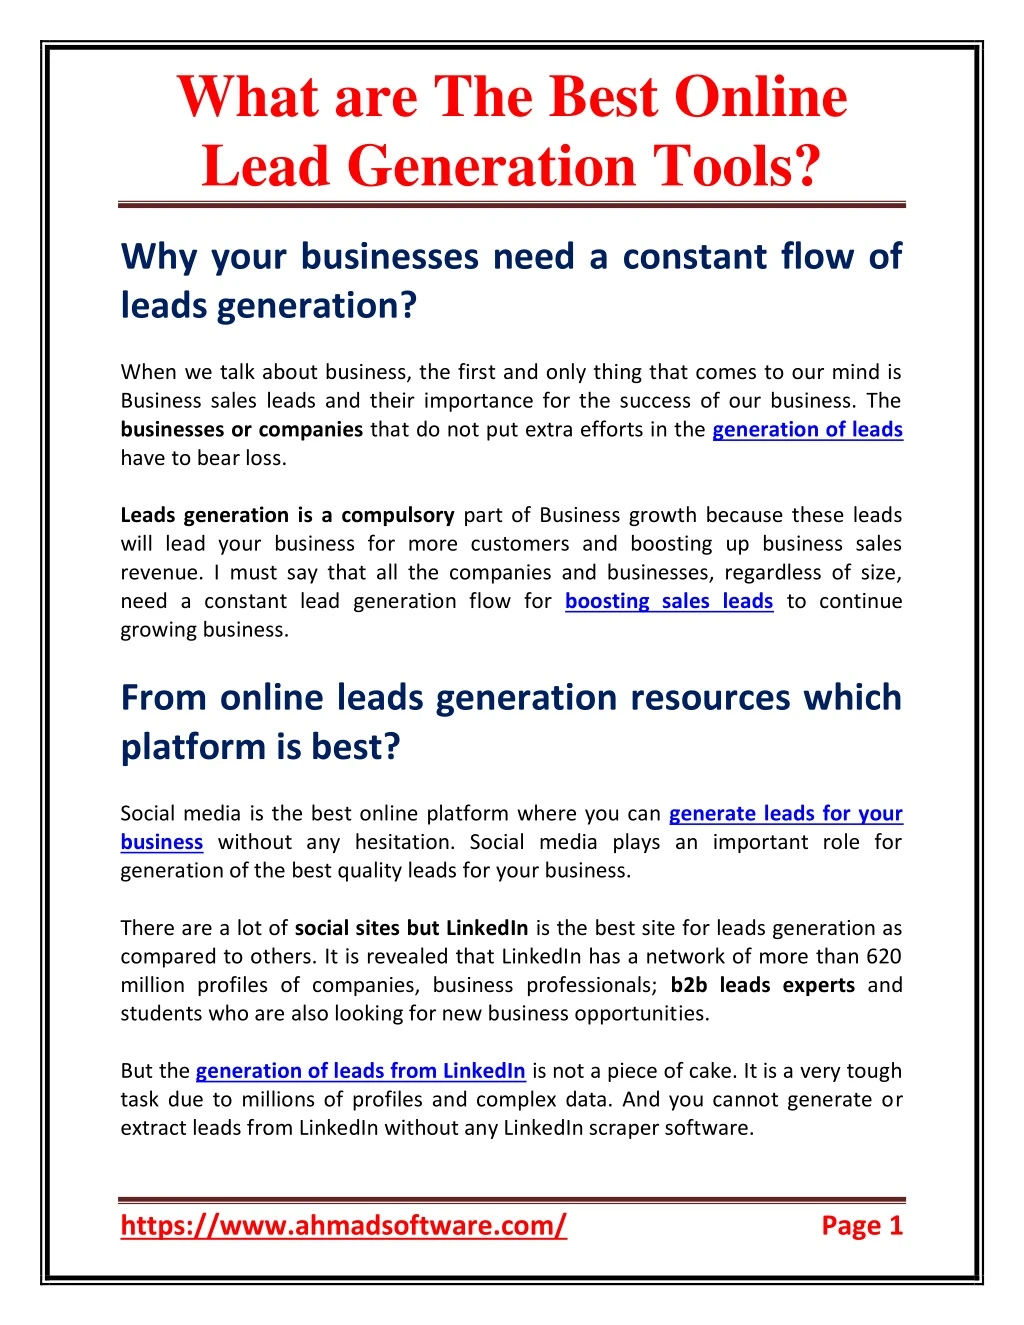 what are the best online lead generation tools